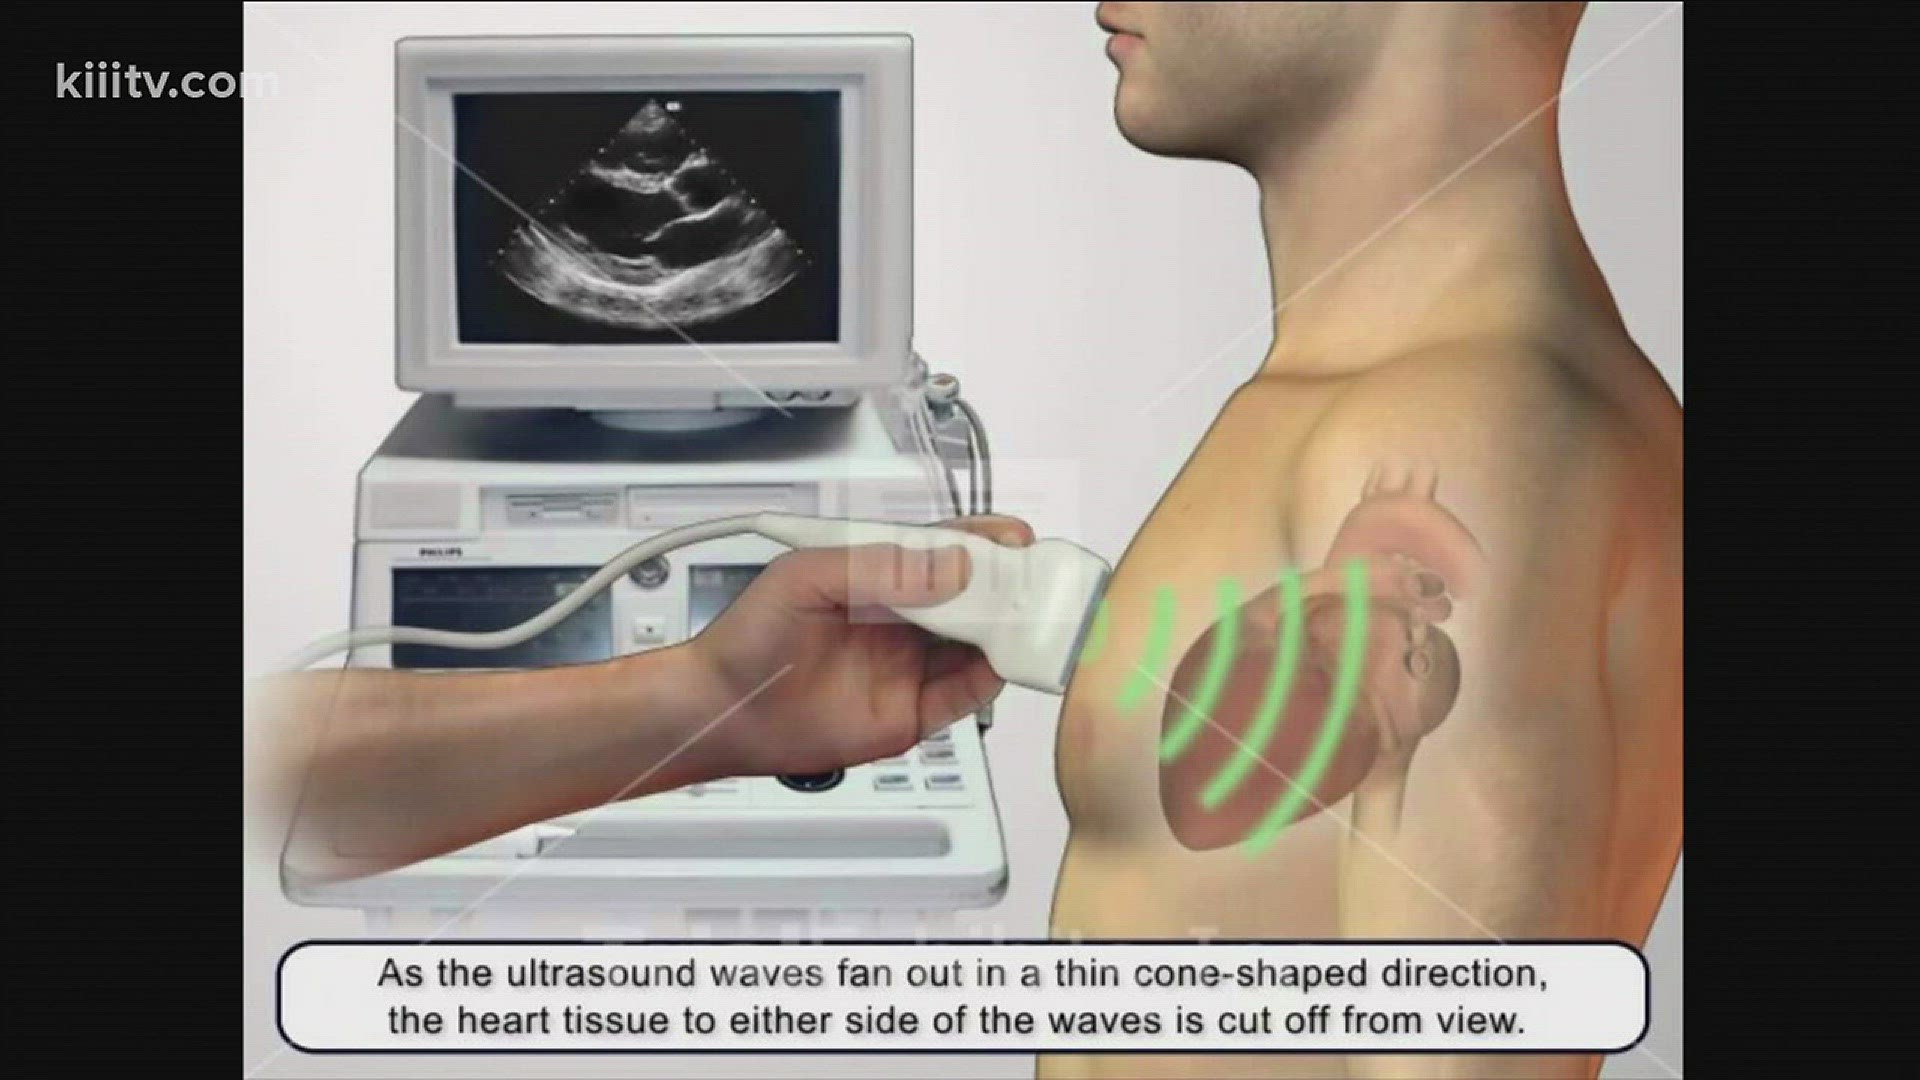 On Dr. Is In, Dr. Silverman explains why someone would need to have an ultrasound of the heart.